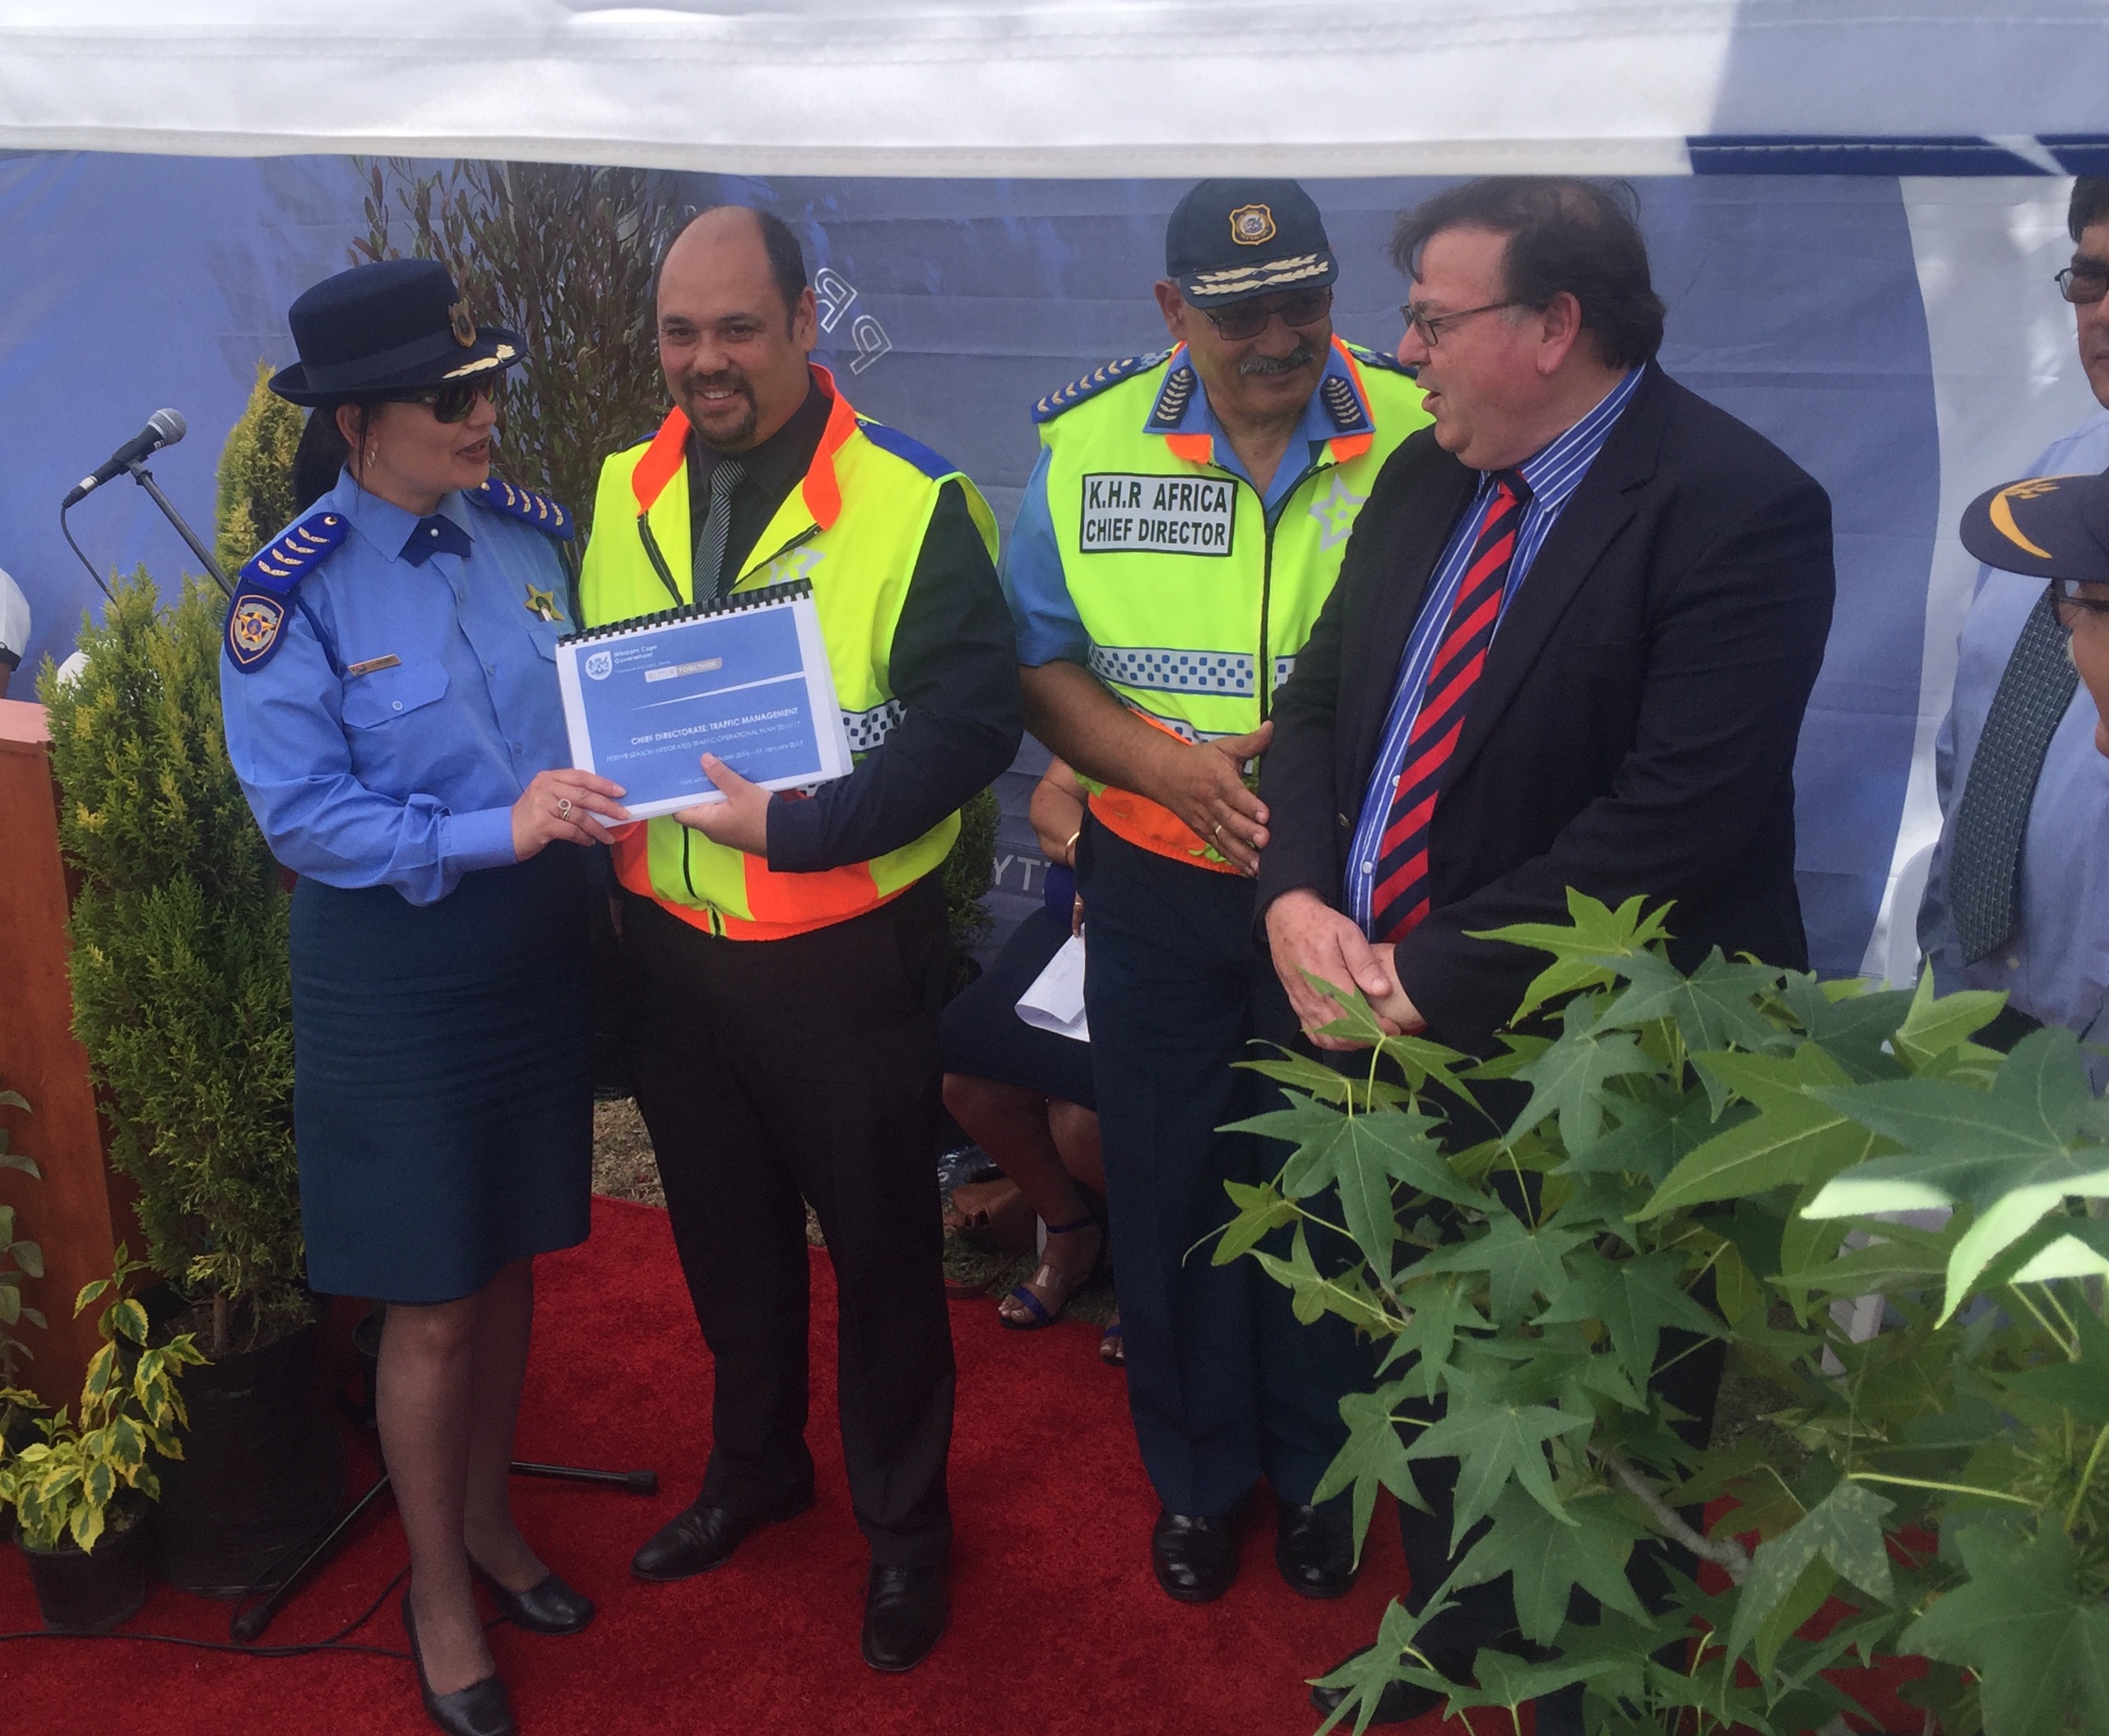 Minister Grant with Provincial Traffic Chief Kenny Africa and Head of Transport Management Branch, Adv. Kyle Reinecke at the launch of the 2016/2017 Western Cape Festive Season Traffic Operational Plan. 